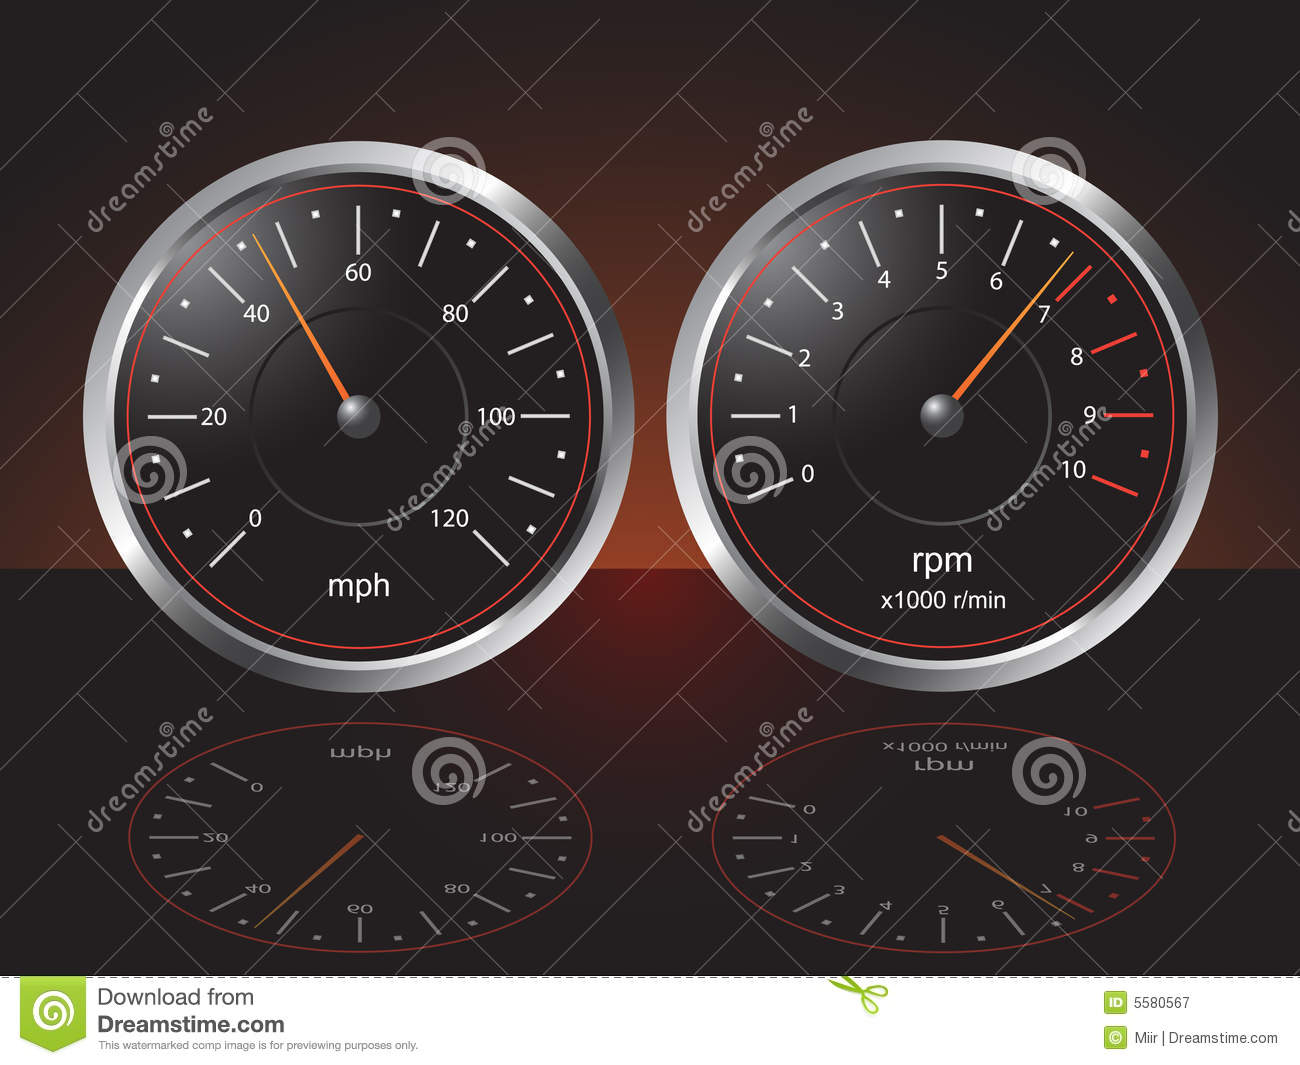 Automobile Dashboard Gauges Royalty Free Stock Photography   Image